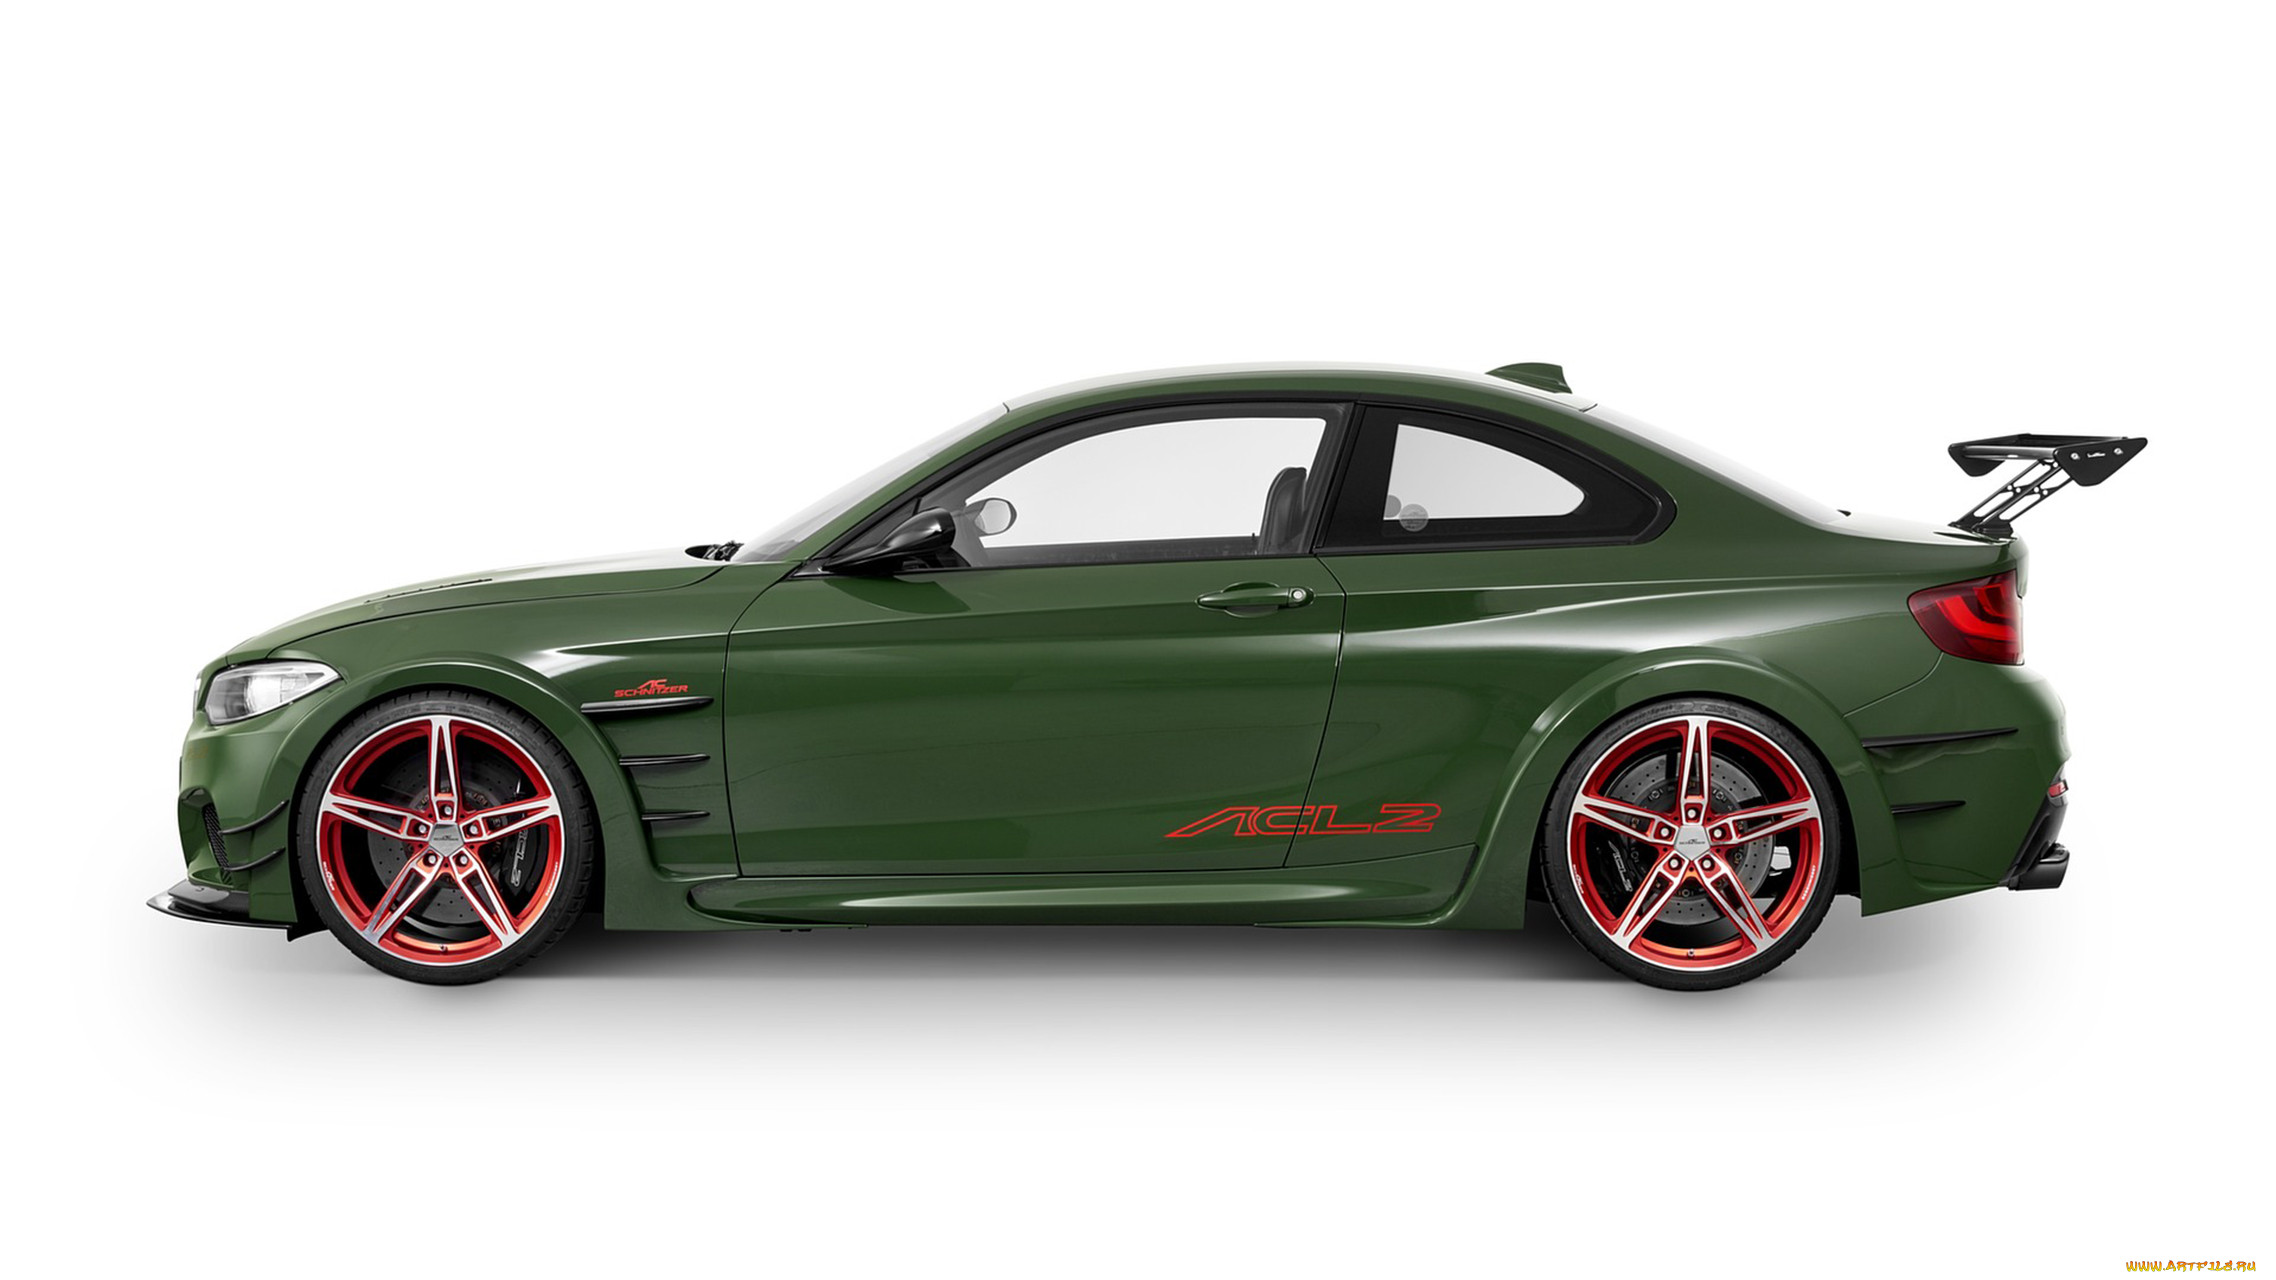 ac schnitzer acl2 concept based on the bmw m-235i coupe 2016, , bmw, concept, ac, schnitzer, acl2, coupe, 2016, m-235i, based